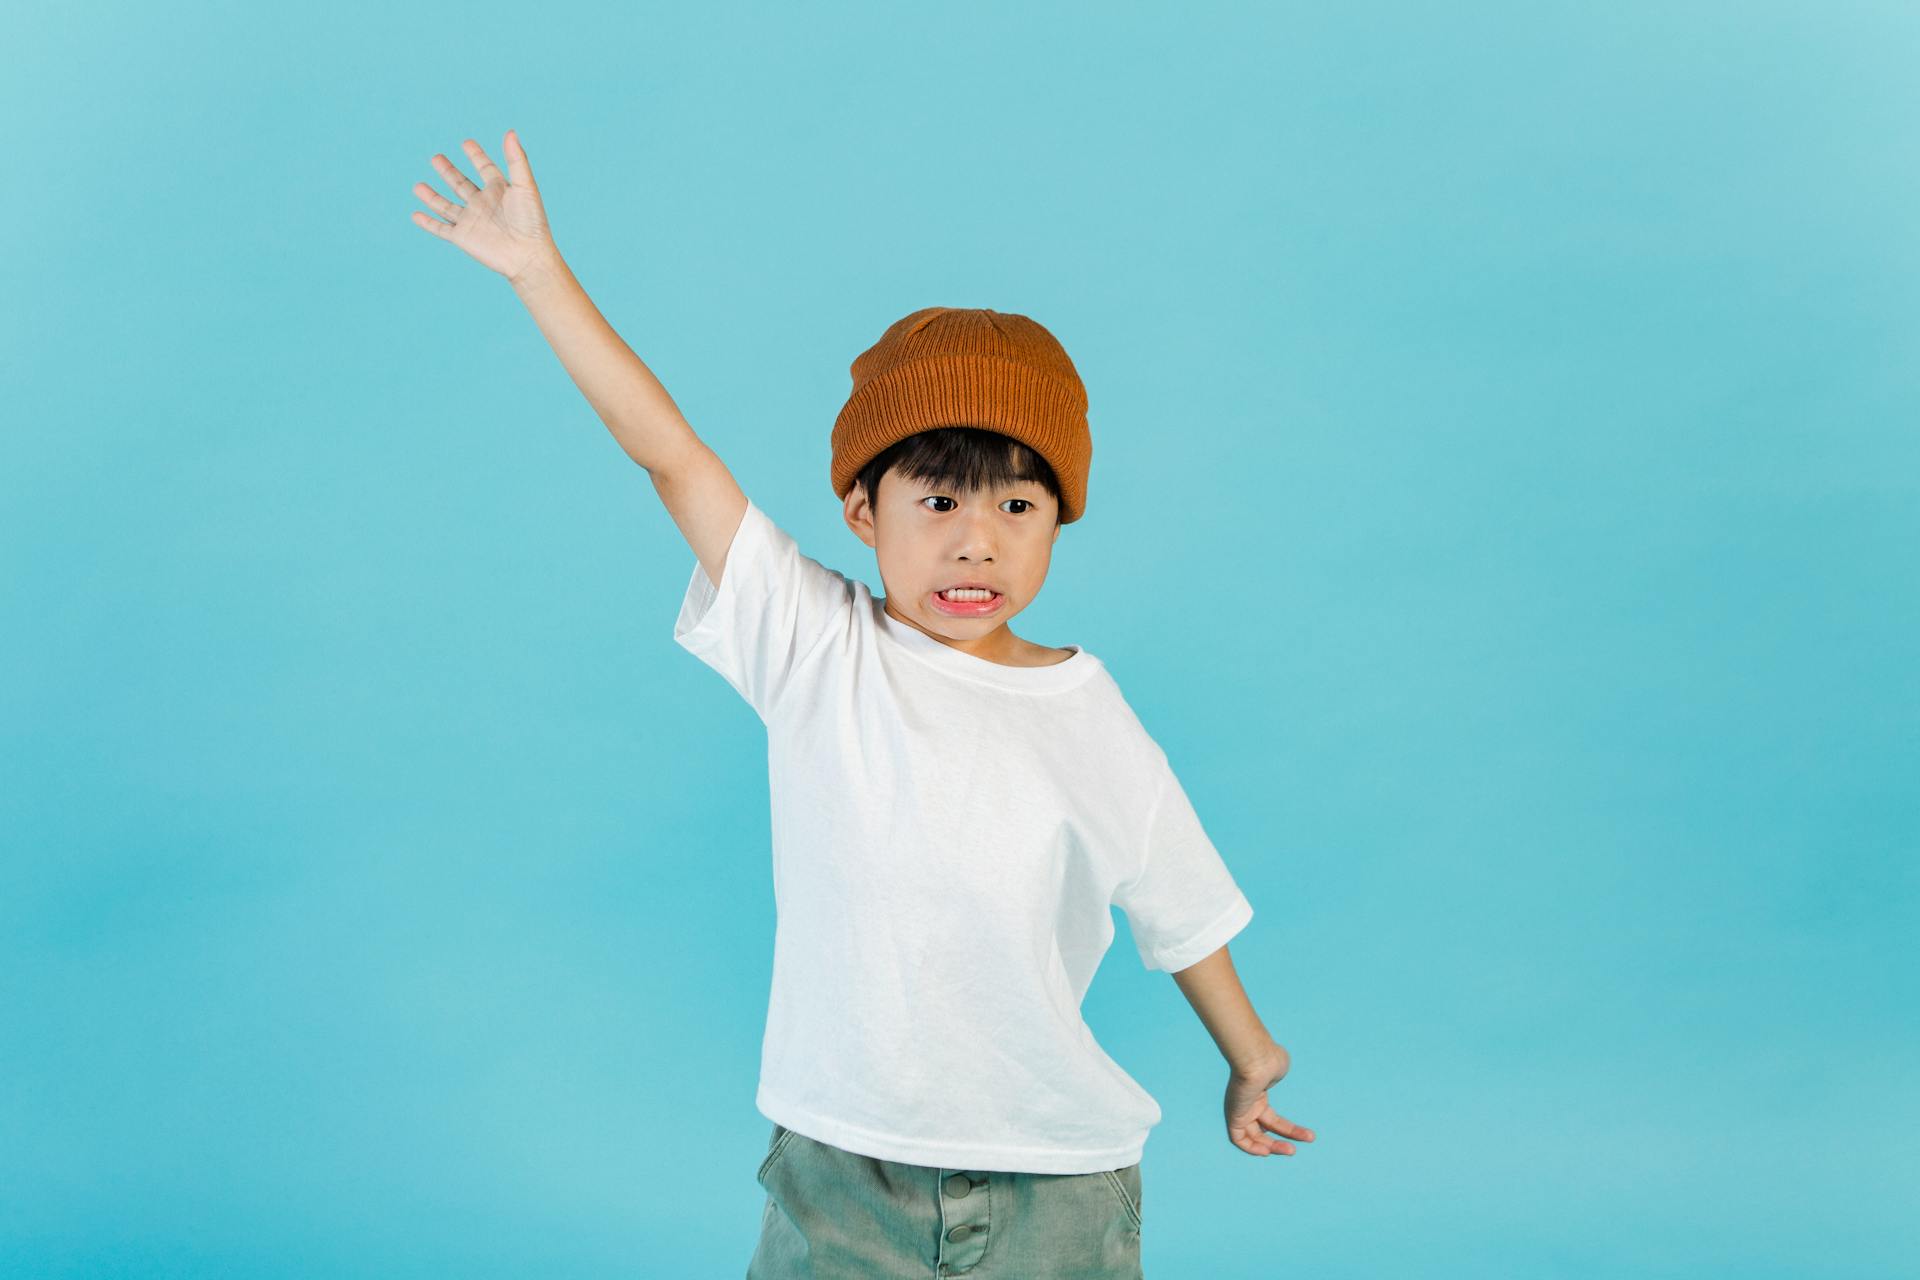 Astonished stylish Asian boy wearing hat and white t shirt looking away while standing with outstretched arms in light studio